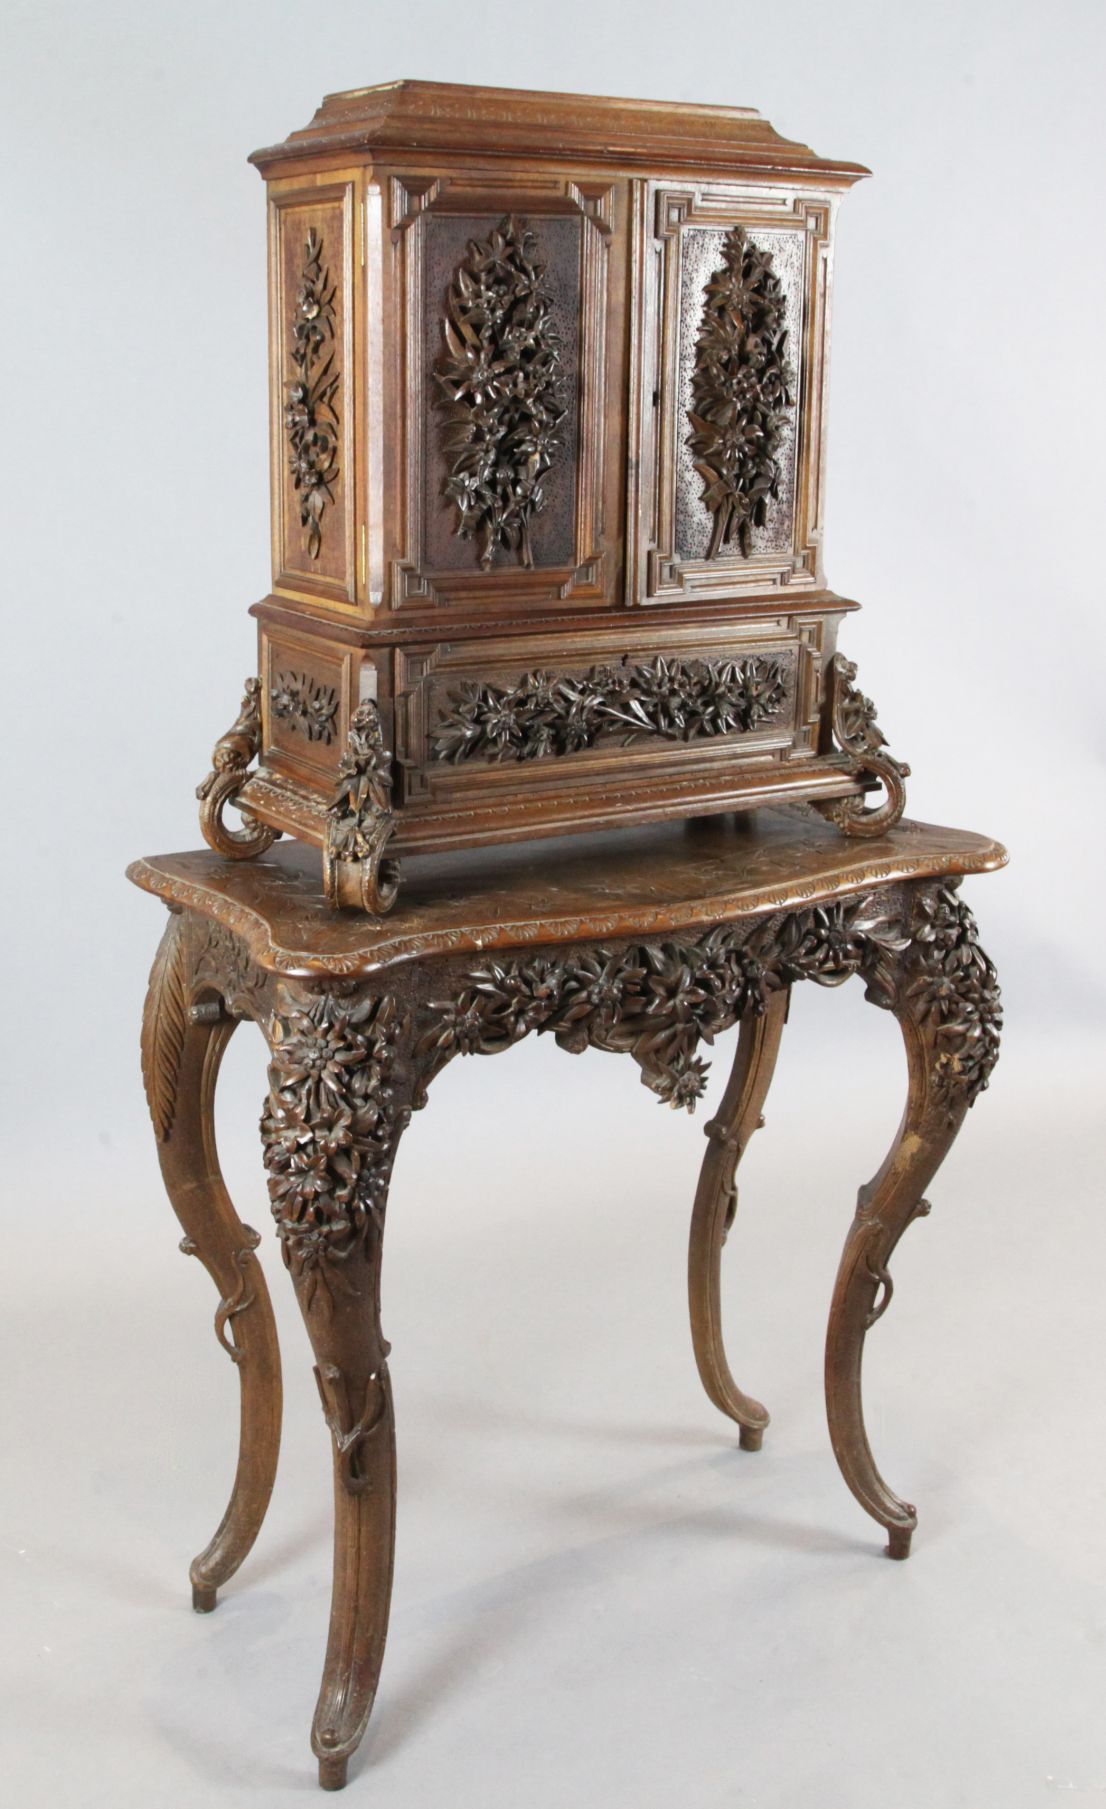 A late 19th century Black Forest relief carved wood cabinet on stand, decorated in relief throughout